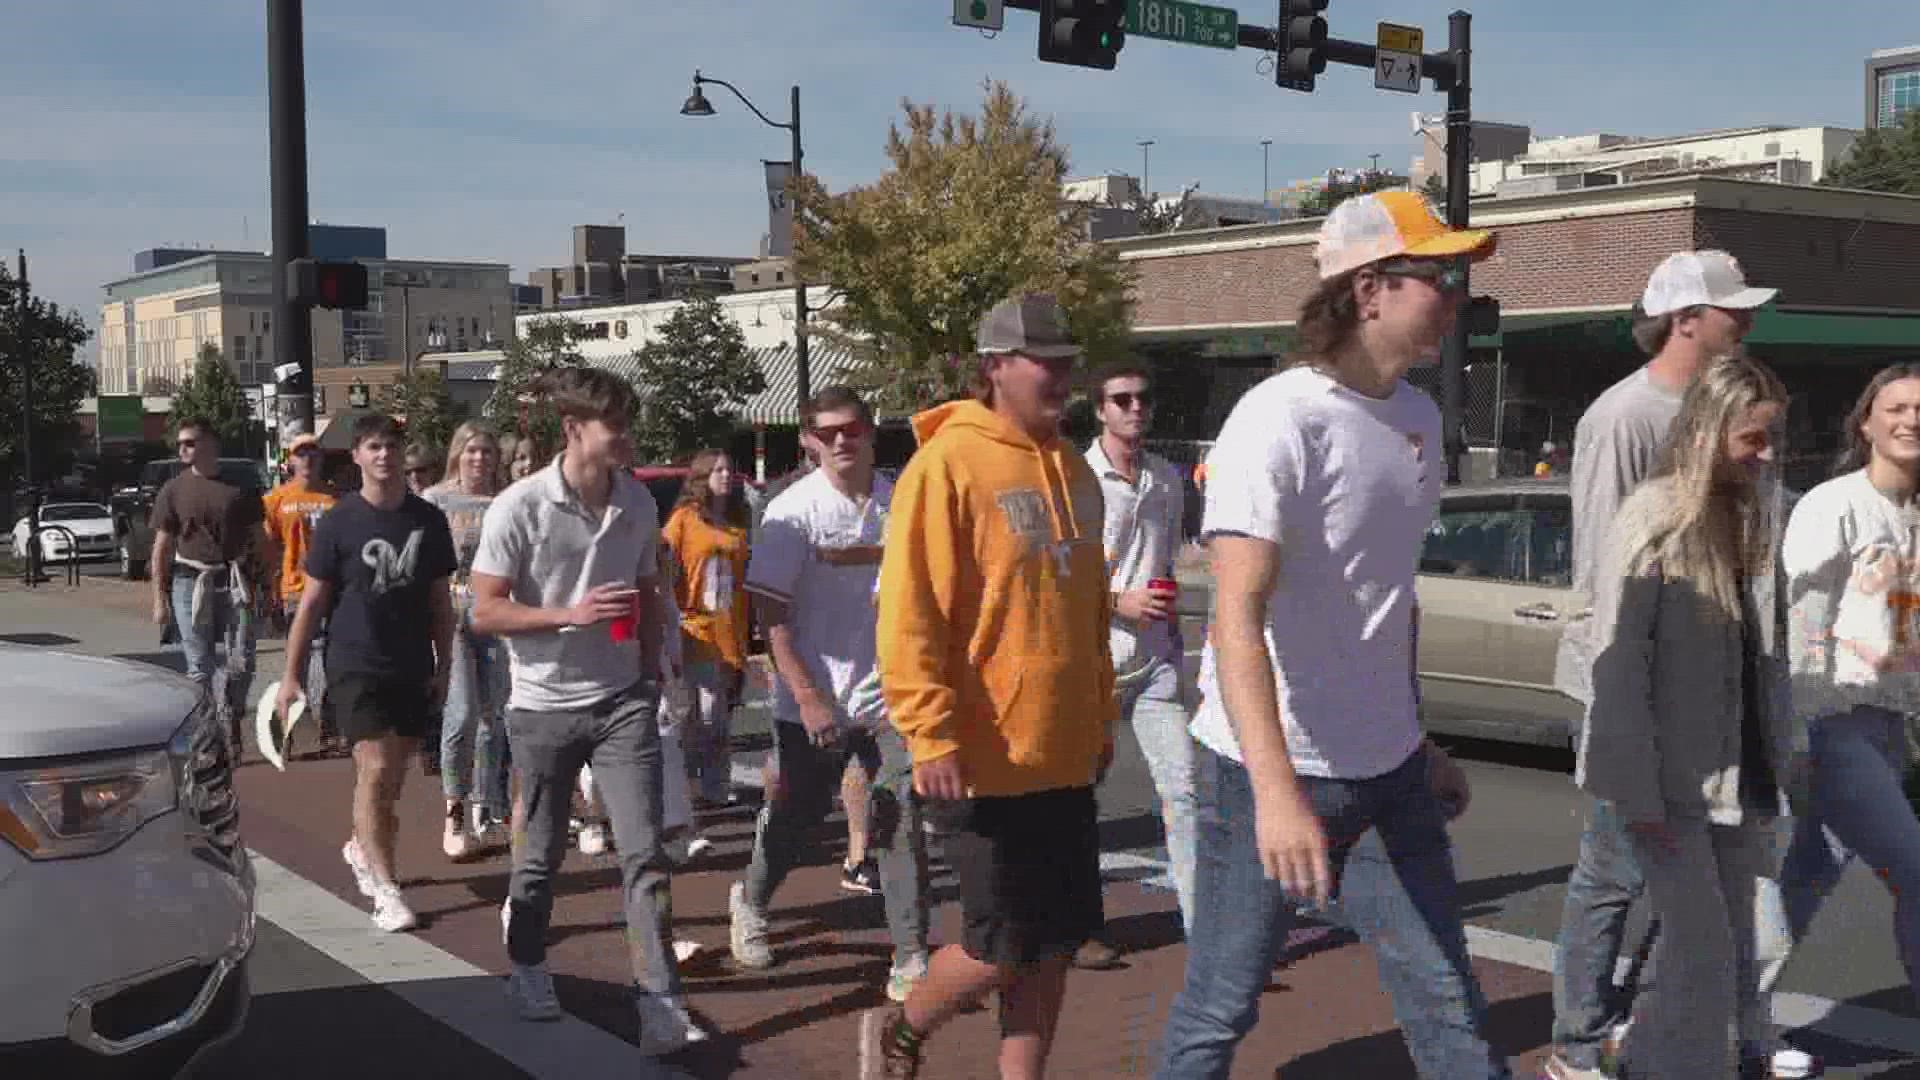 Tennessee football is bringing record-breaking sales for businesses on Cumberland Avenue. They said they have to take on more staff to prepare for the crowds.